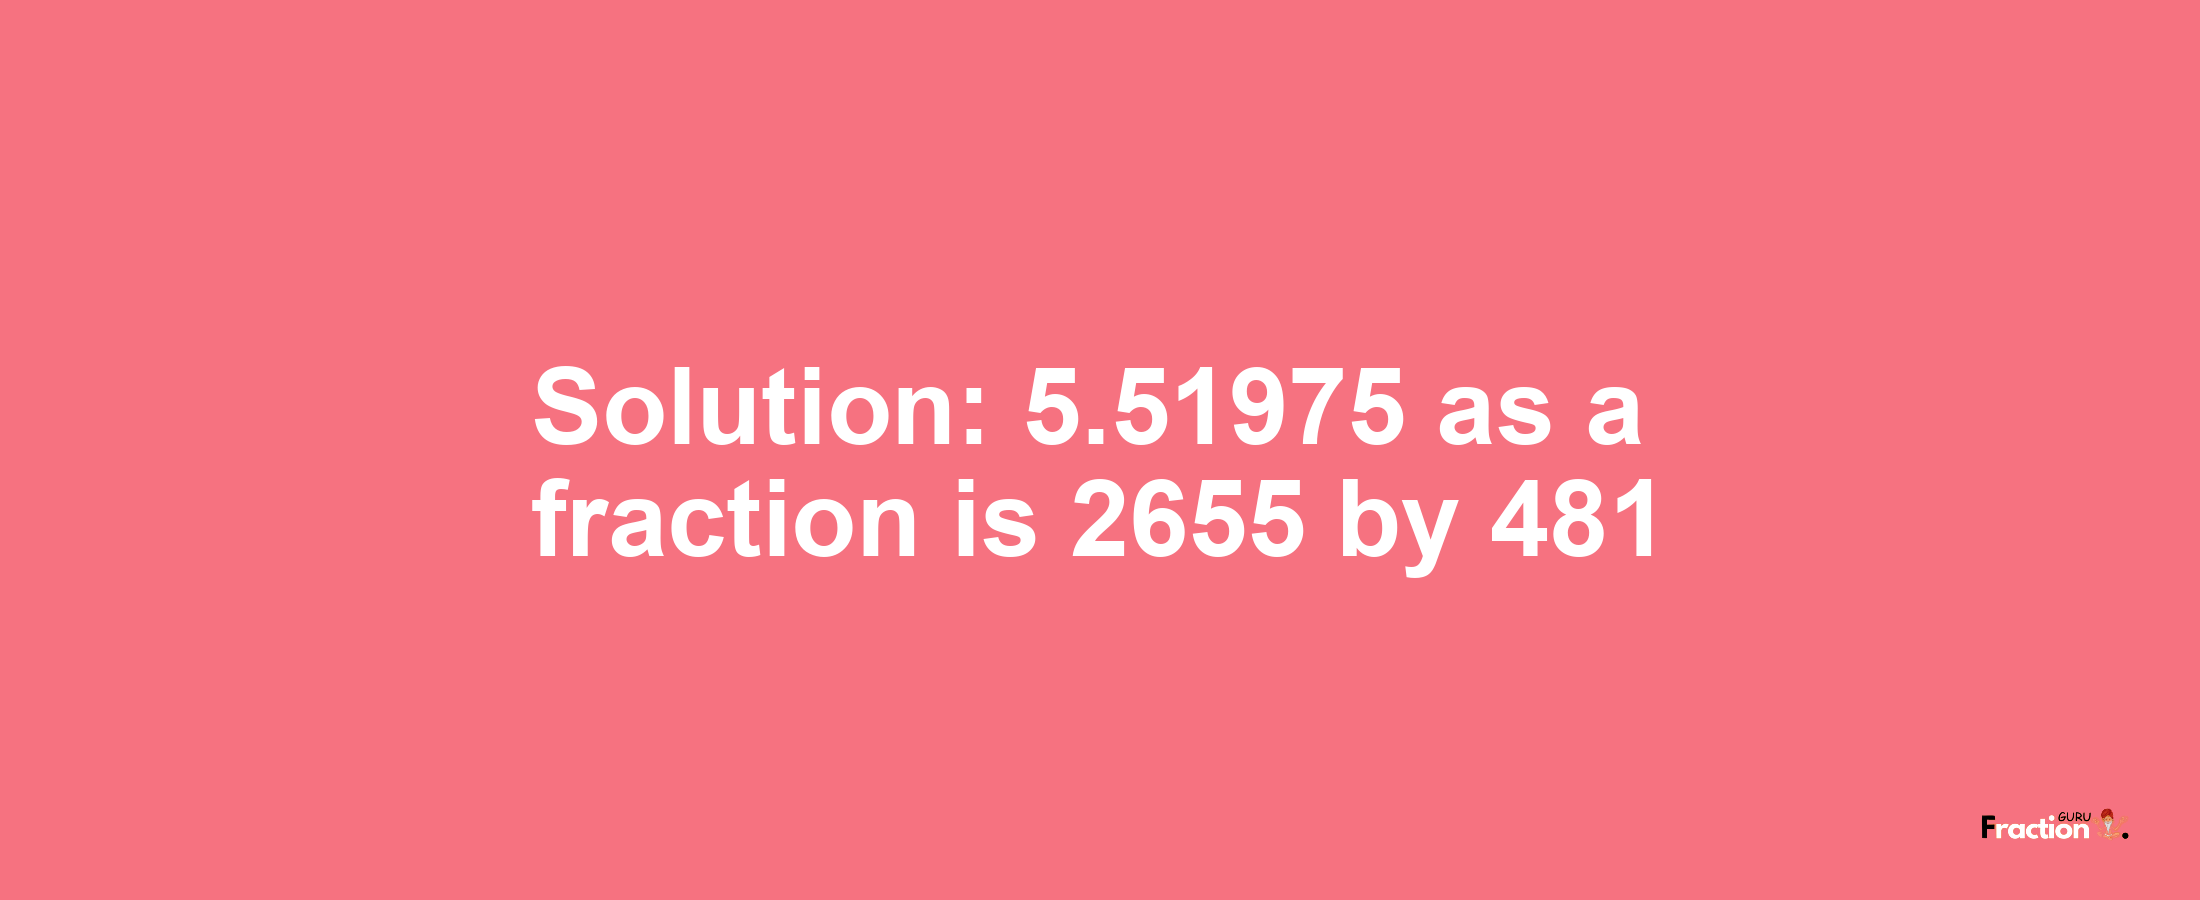 Solution:5.51975 as a fraction is 2655/481